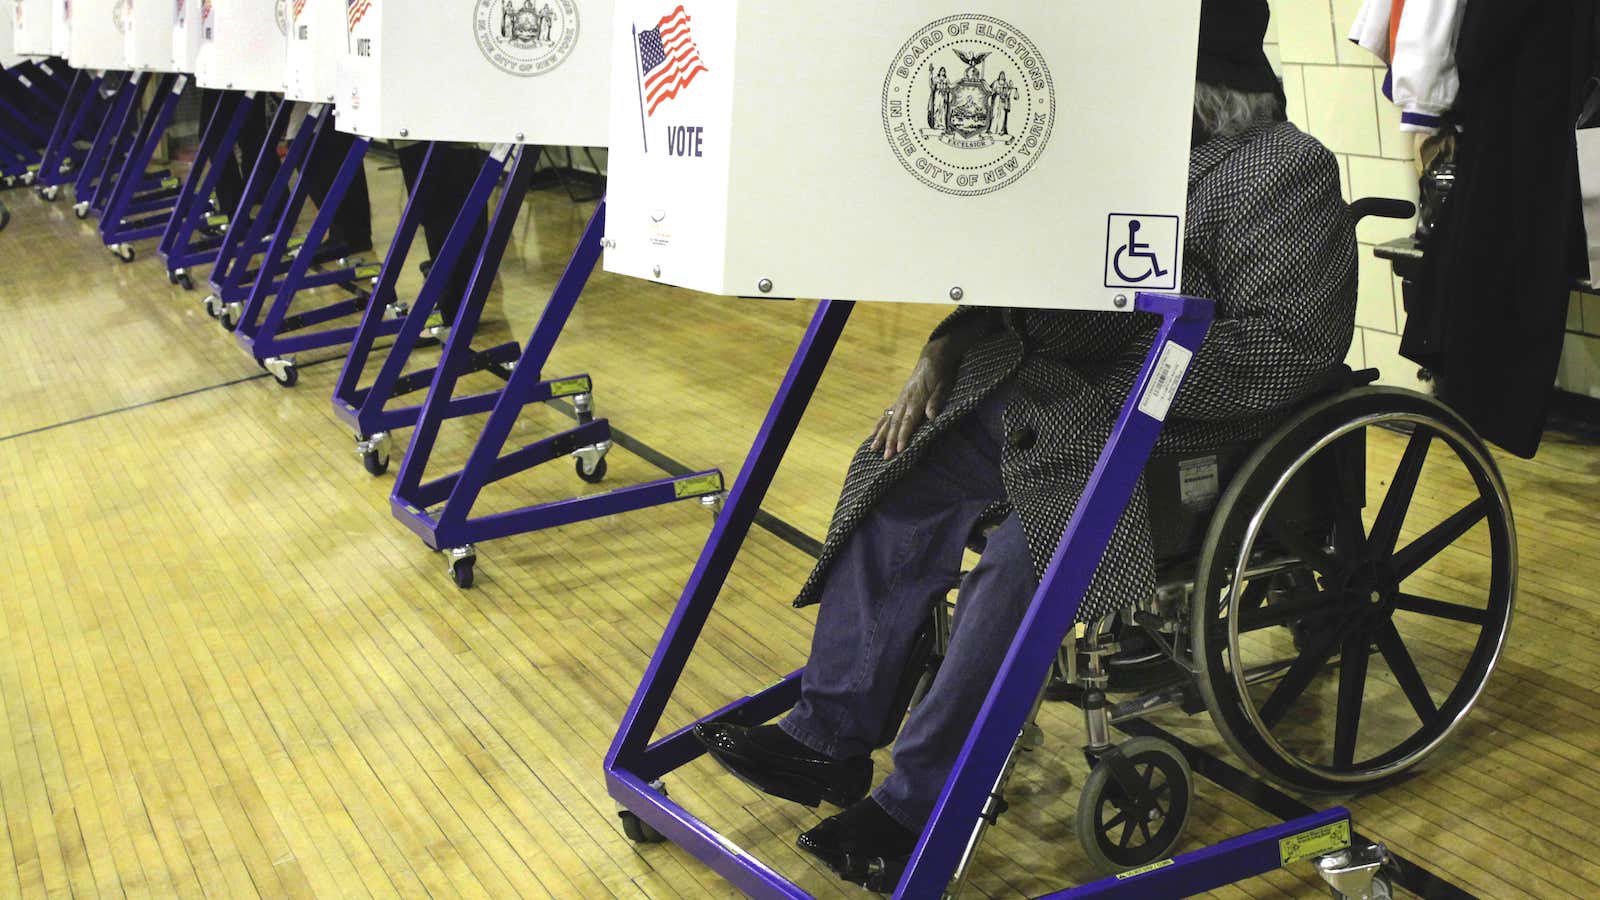 Voters with disabilities could decide the 2020 US election—if we felt compelled to vote.